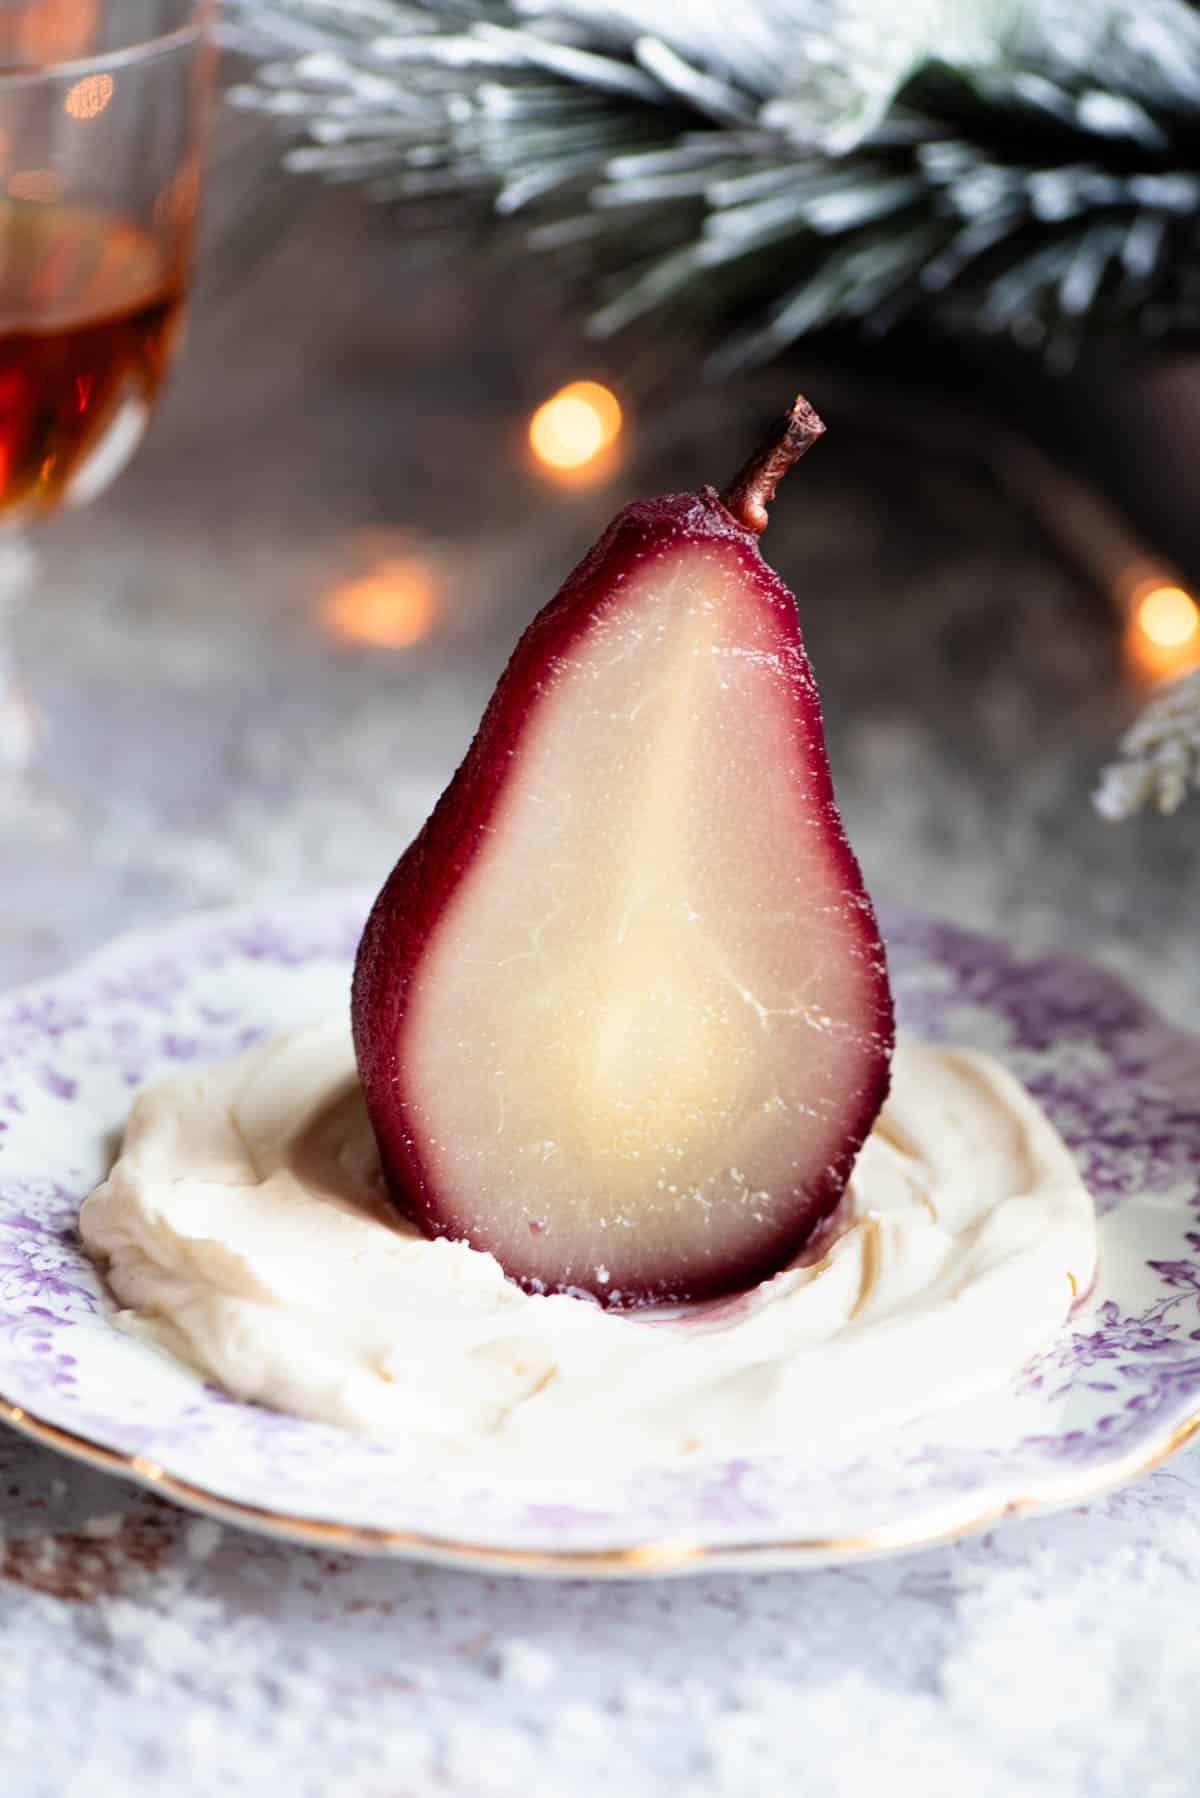 A red wine poached pear cut in half on a plate with Amaretto whipped cream, the background is Christmassy.